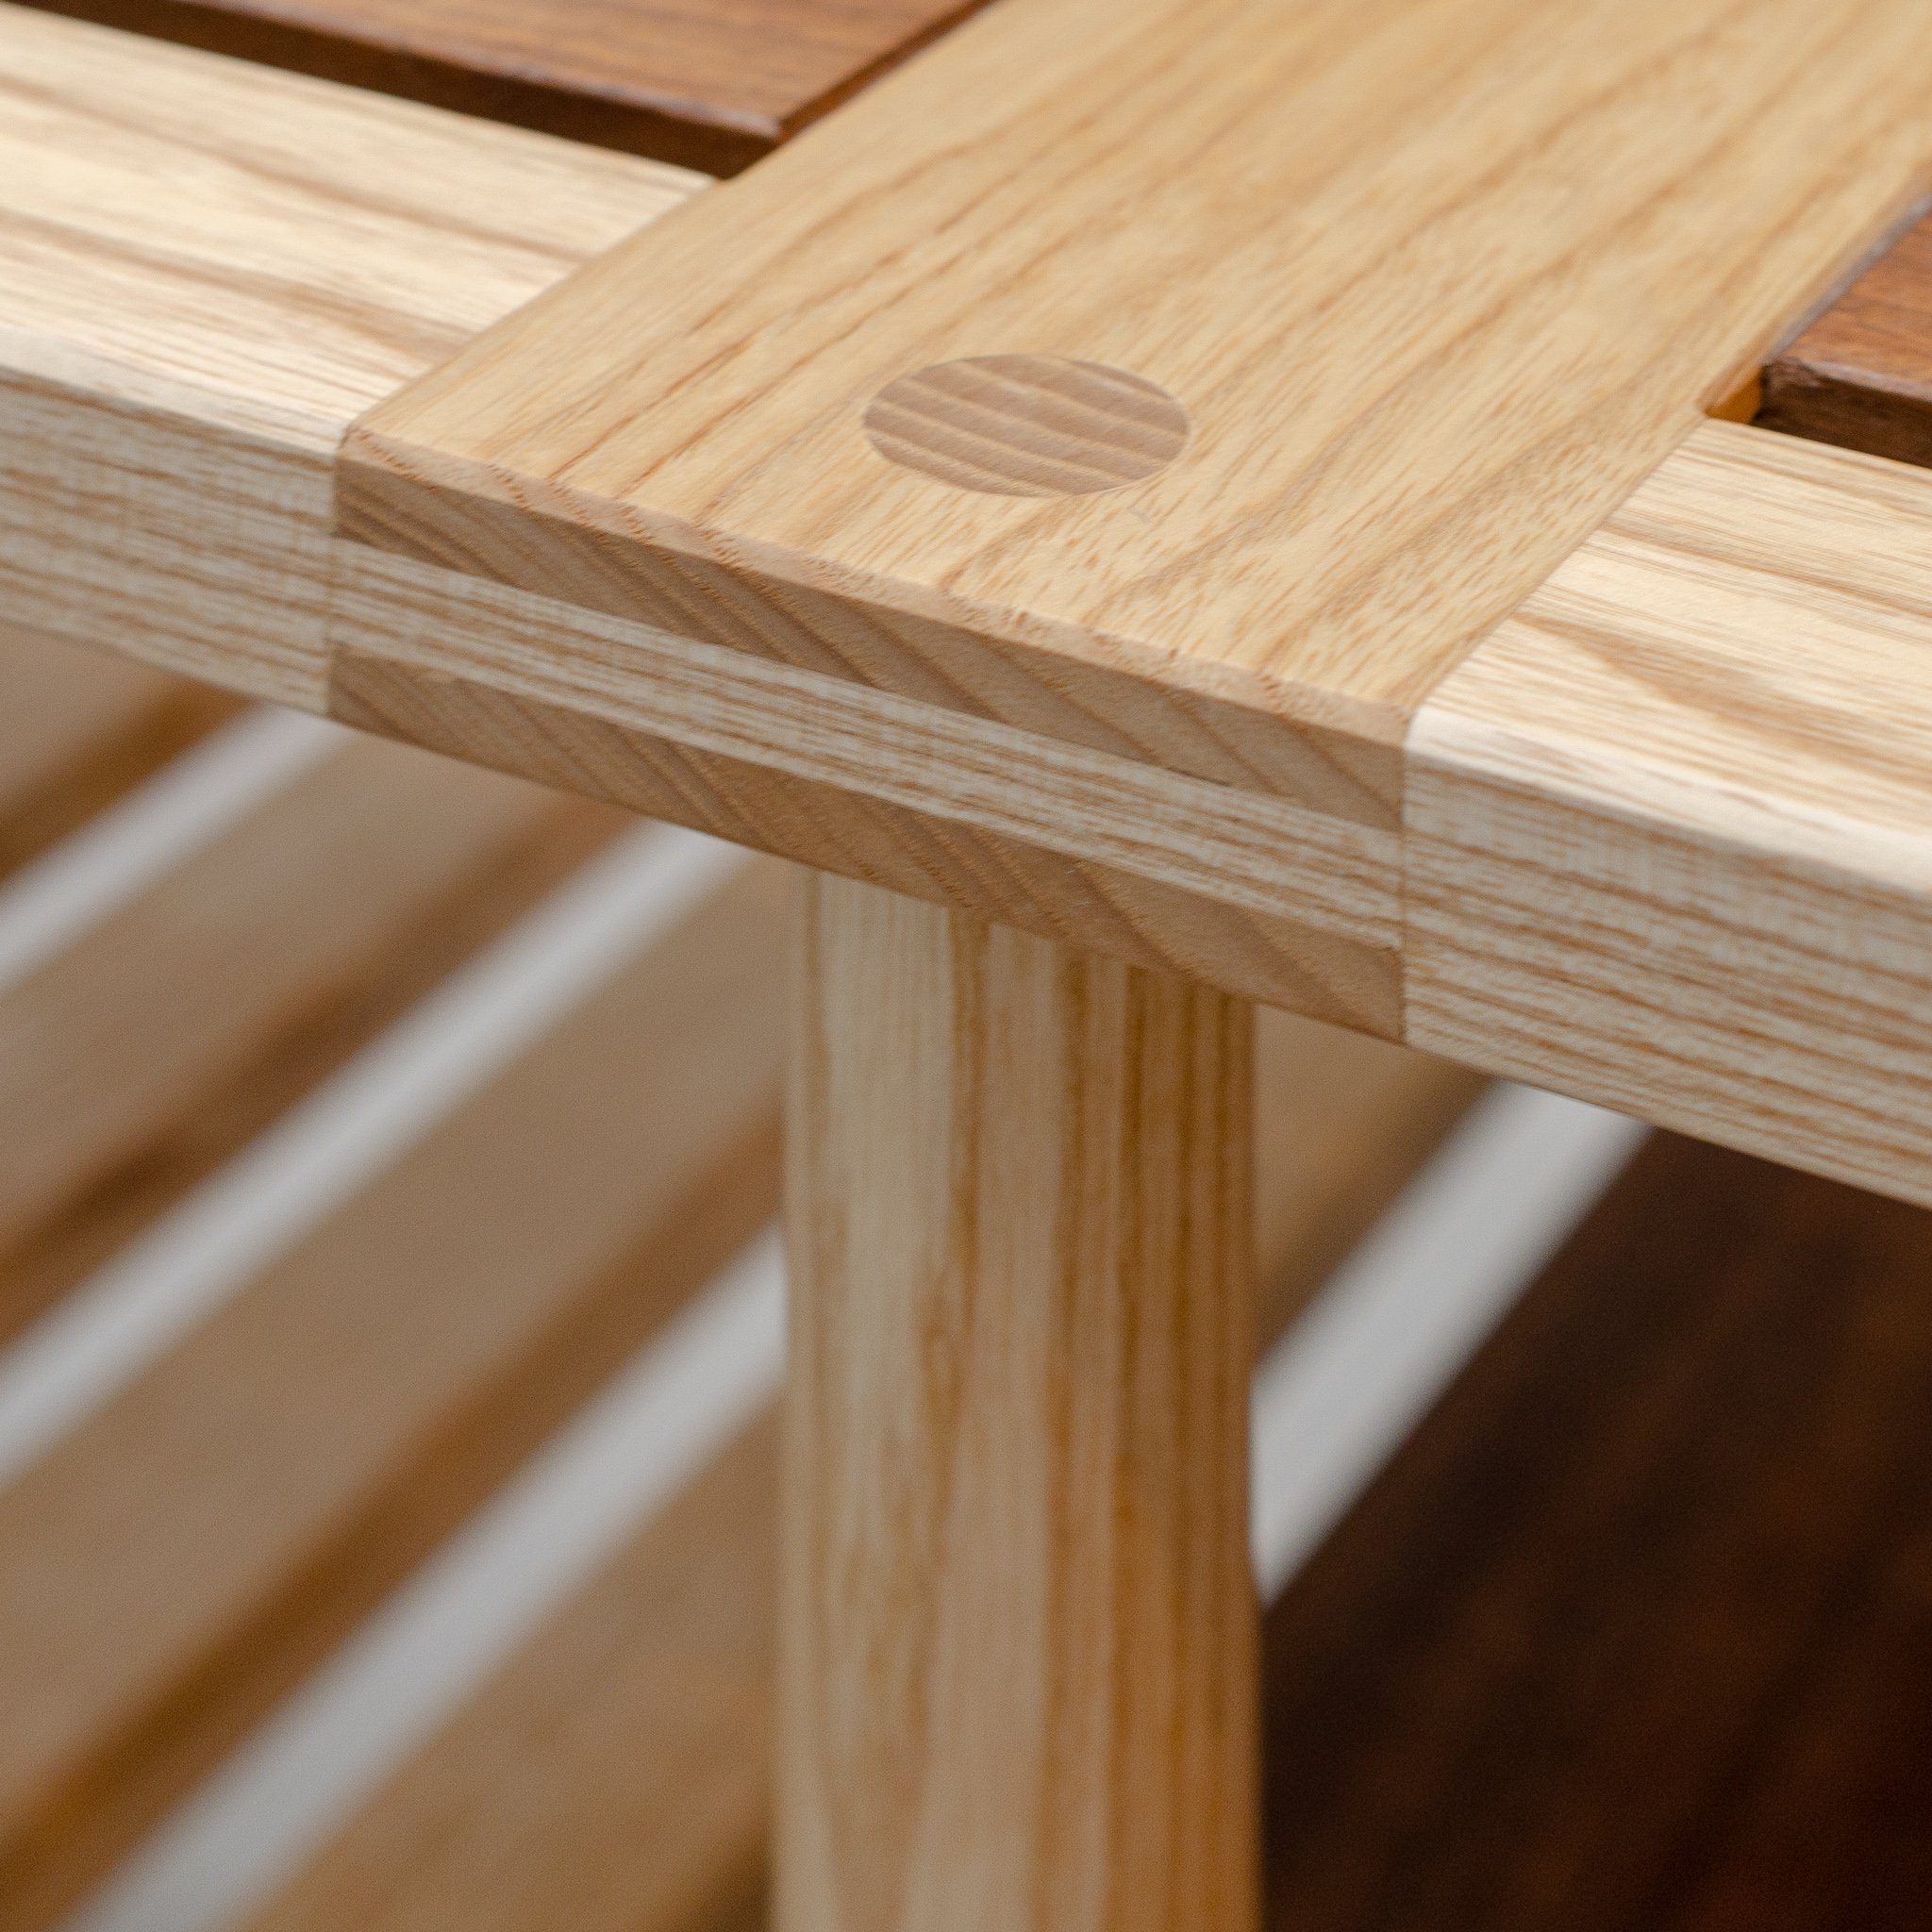 Joinery detail from a hallway bench in ash